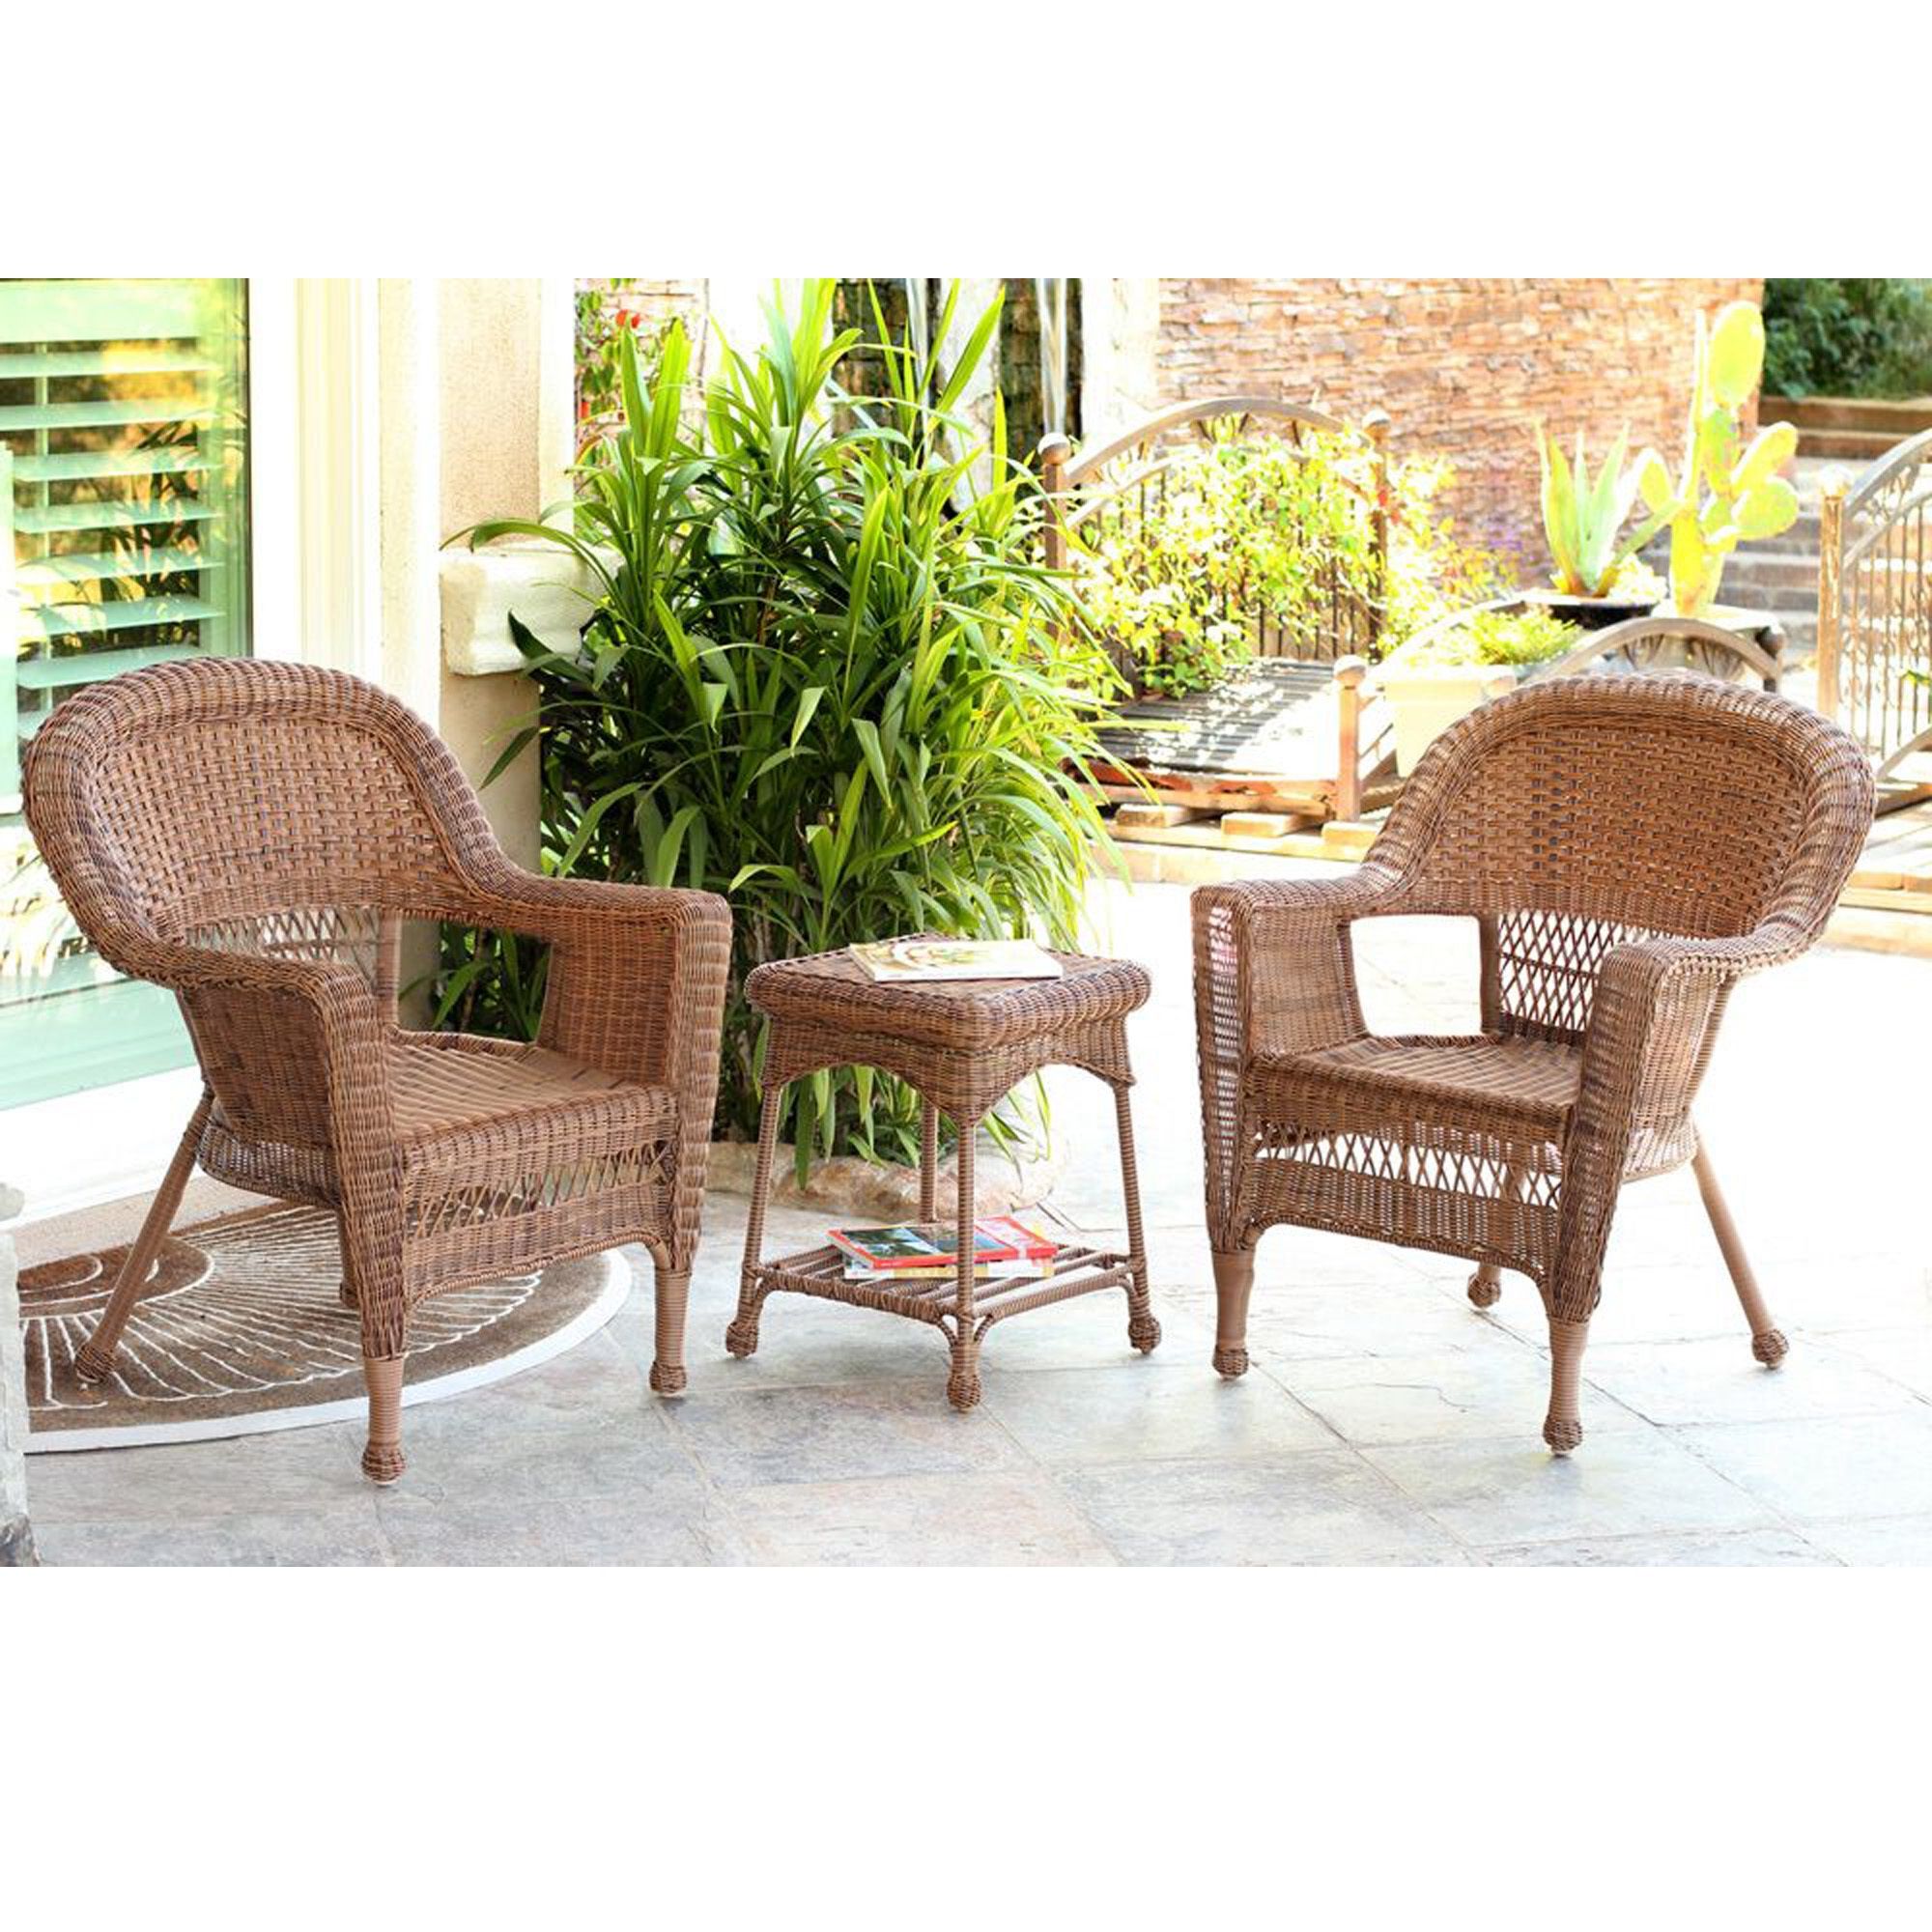 Latest Set Of 3 Honey Brown Resin Wicker Patio Chairs And End Table Furniture Inside Rattan Wicker Outdoor Seating Sets (View 12 of 15)